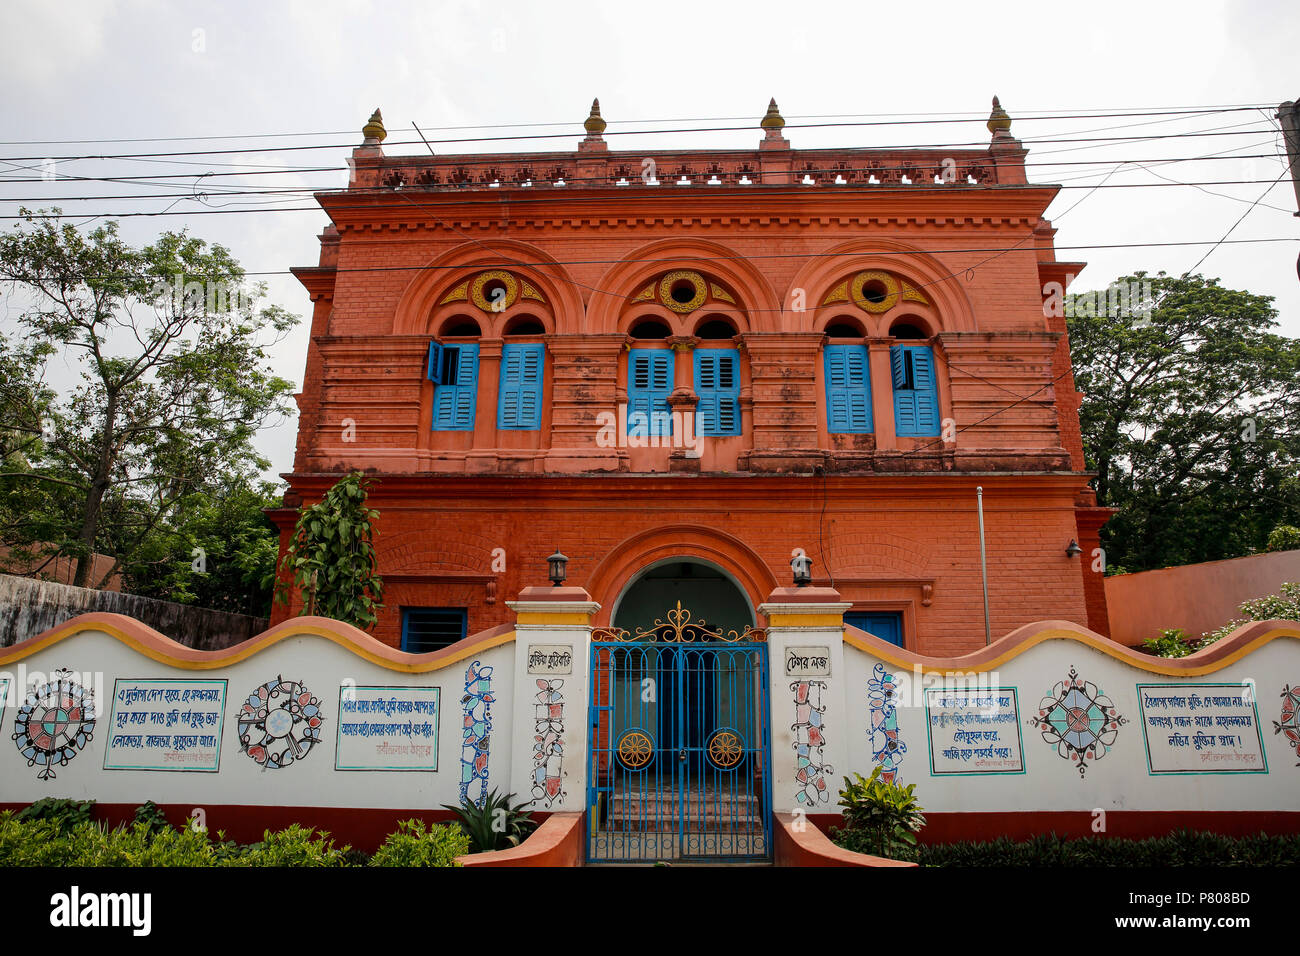 Tagore Lodge, the ancestral house of Nobel laureate poet Rabindranath Tagore in Kushtia town has been converted into “Tagore Museum”. Stock Photo